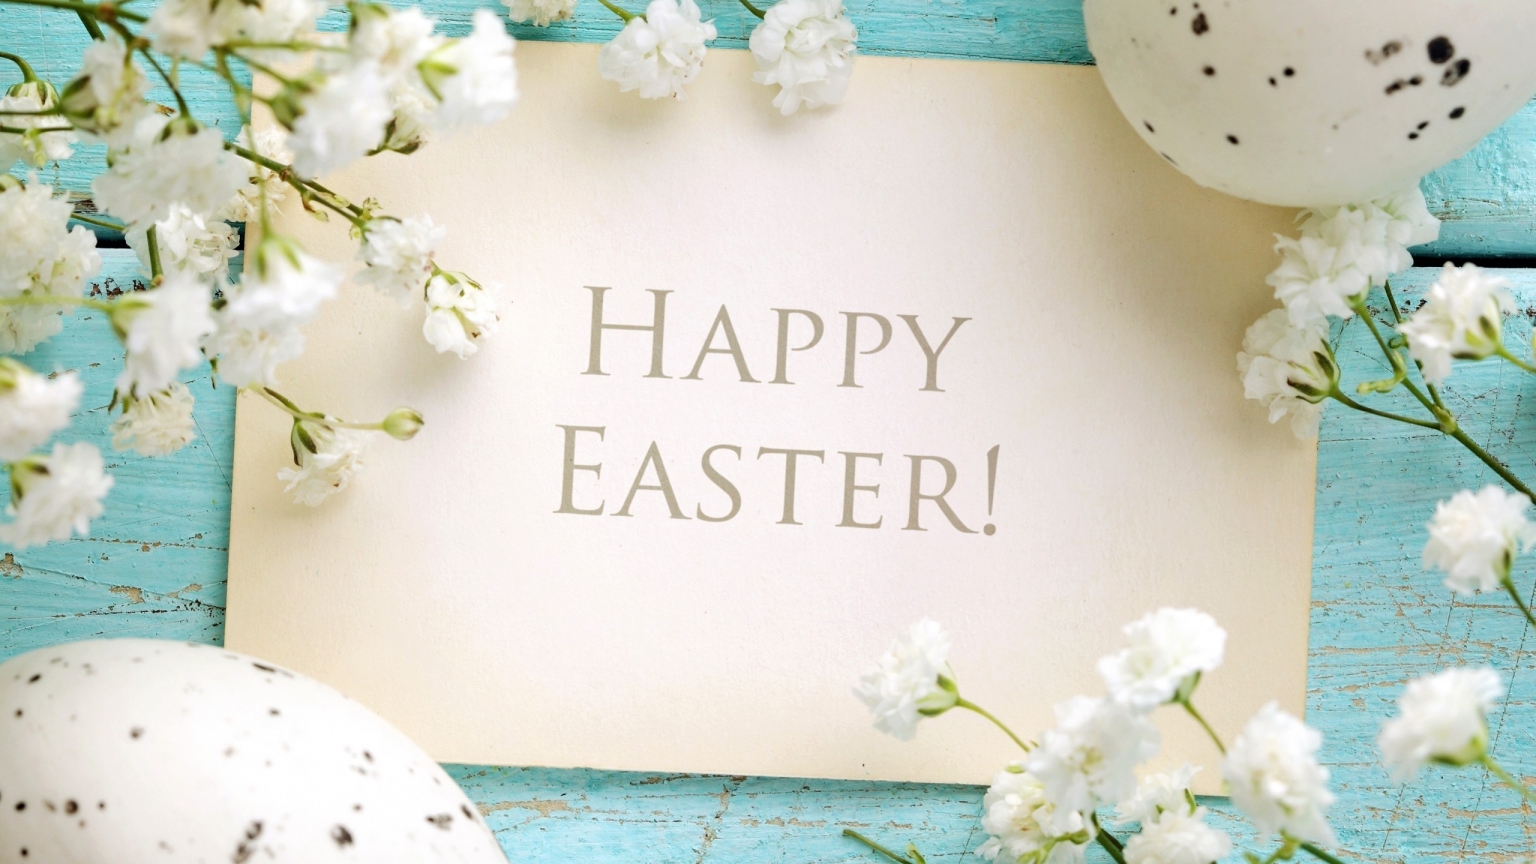 Happy Easter 2014 for 1536 x 864 HDTV resolution